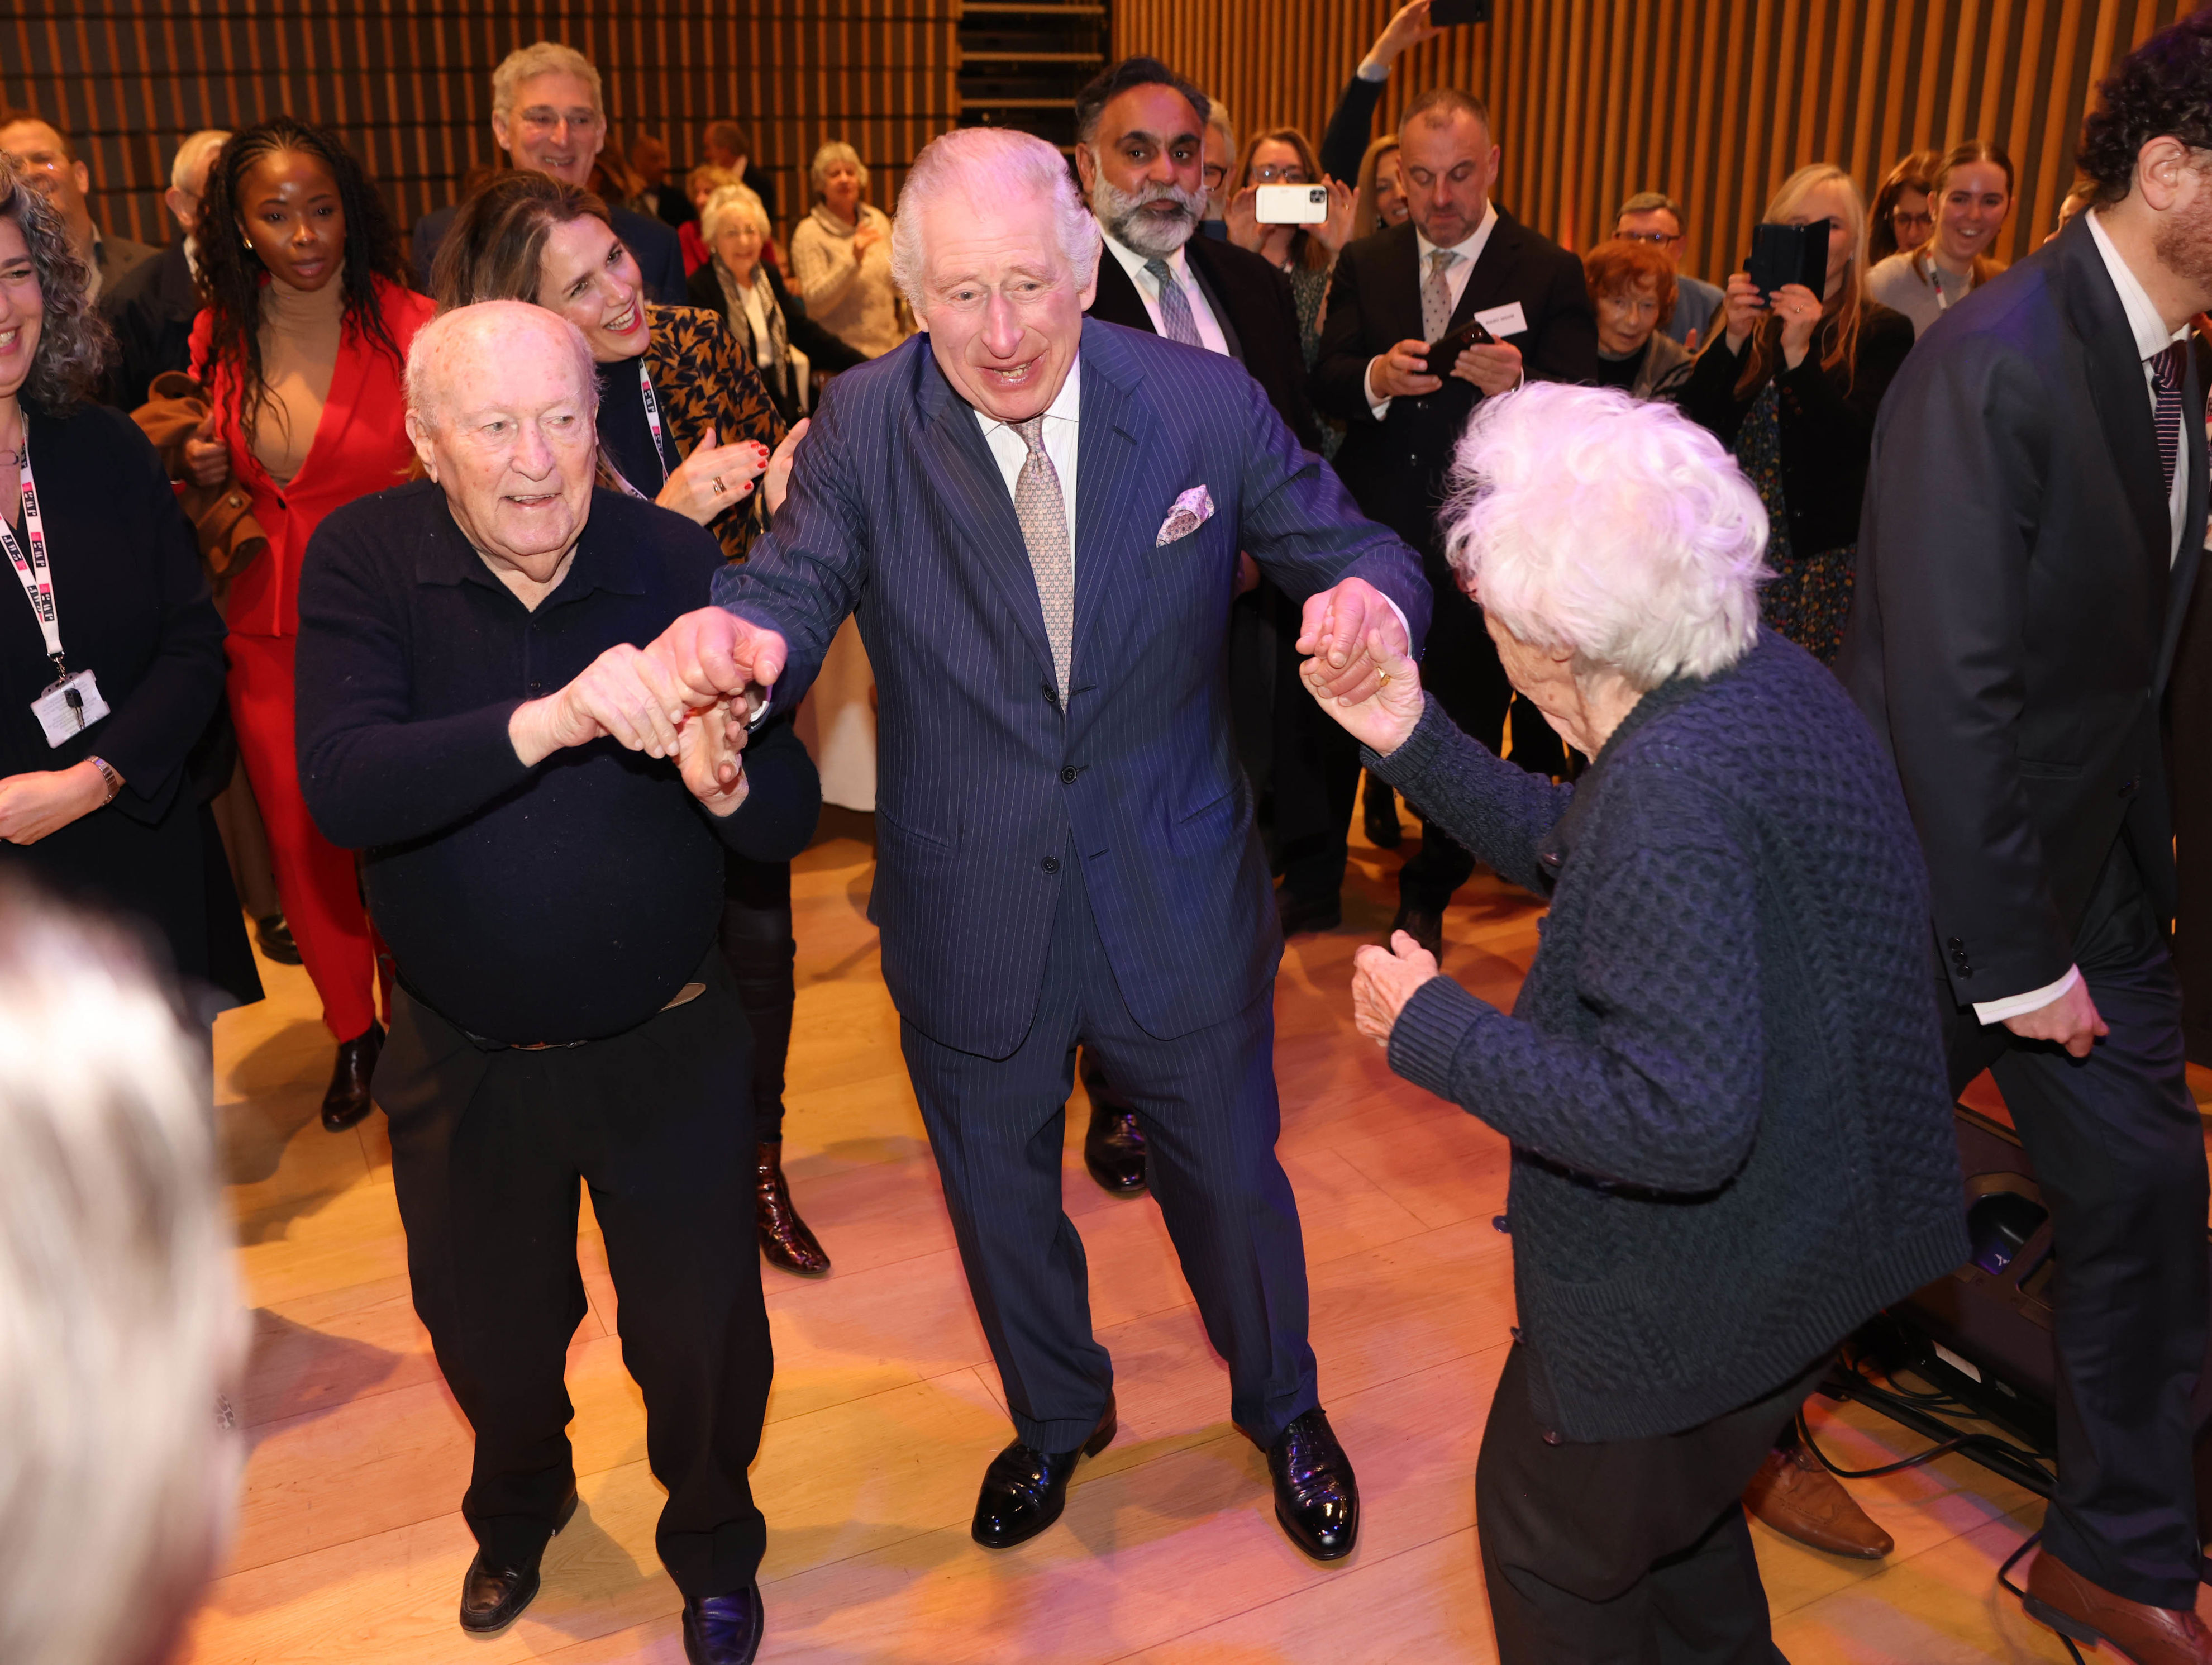 <p>King Charles III danced the hora at a pre-Hanukkah reception hosted for Holocaust survivors at the JW3 Community Centre in London on Dec. 16, 2022.</p>